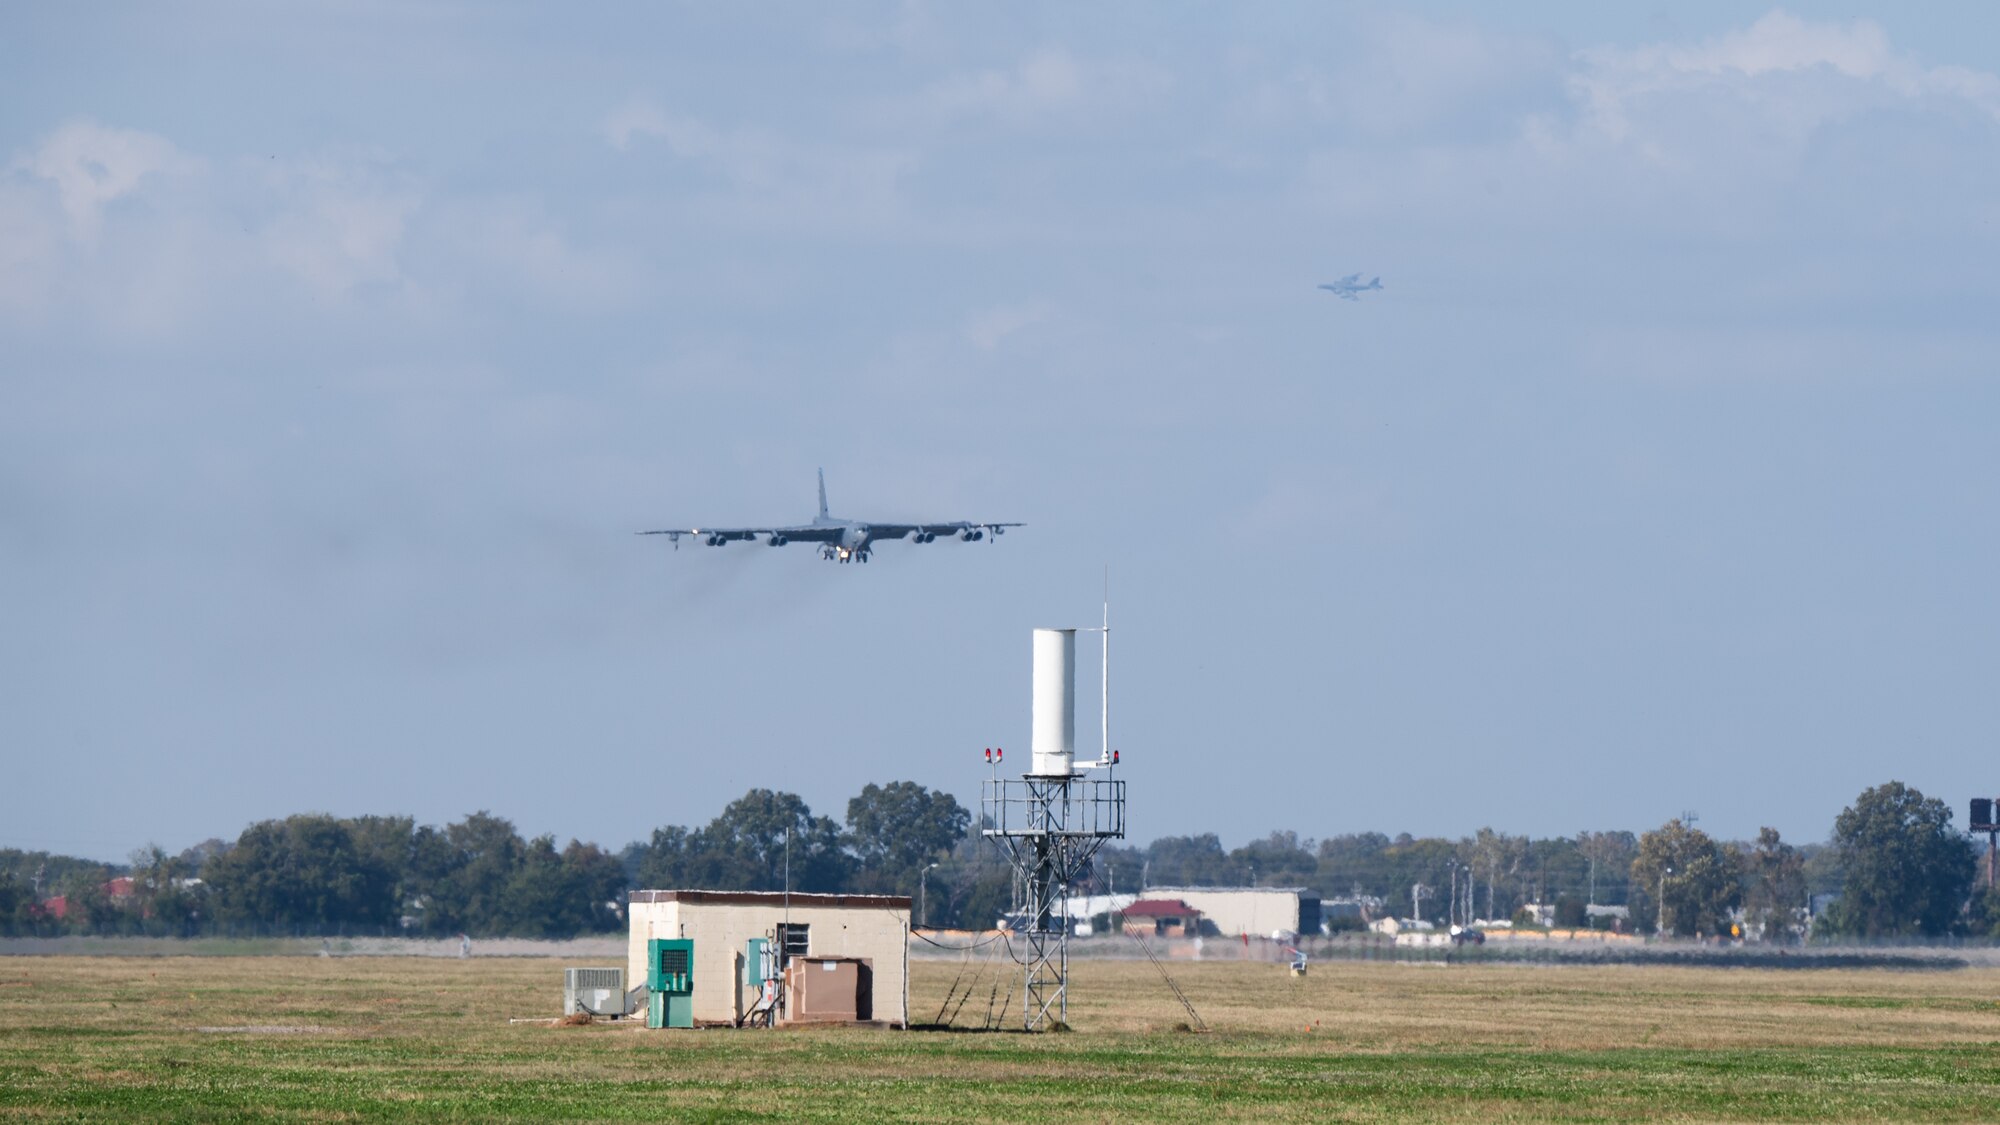 A B-52H Stratofortress lands at Barksdale Air Force Base, La., as part of Global Thunder 21, Oct. 20, 2020. Exercises like GLOBAL THUNDER involve extensive planning and coordination to provide unique training opportunities for assigned units and forces. (U.S. Air Force photo by Airman 1st Class Jacob B. Wrightsman)